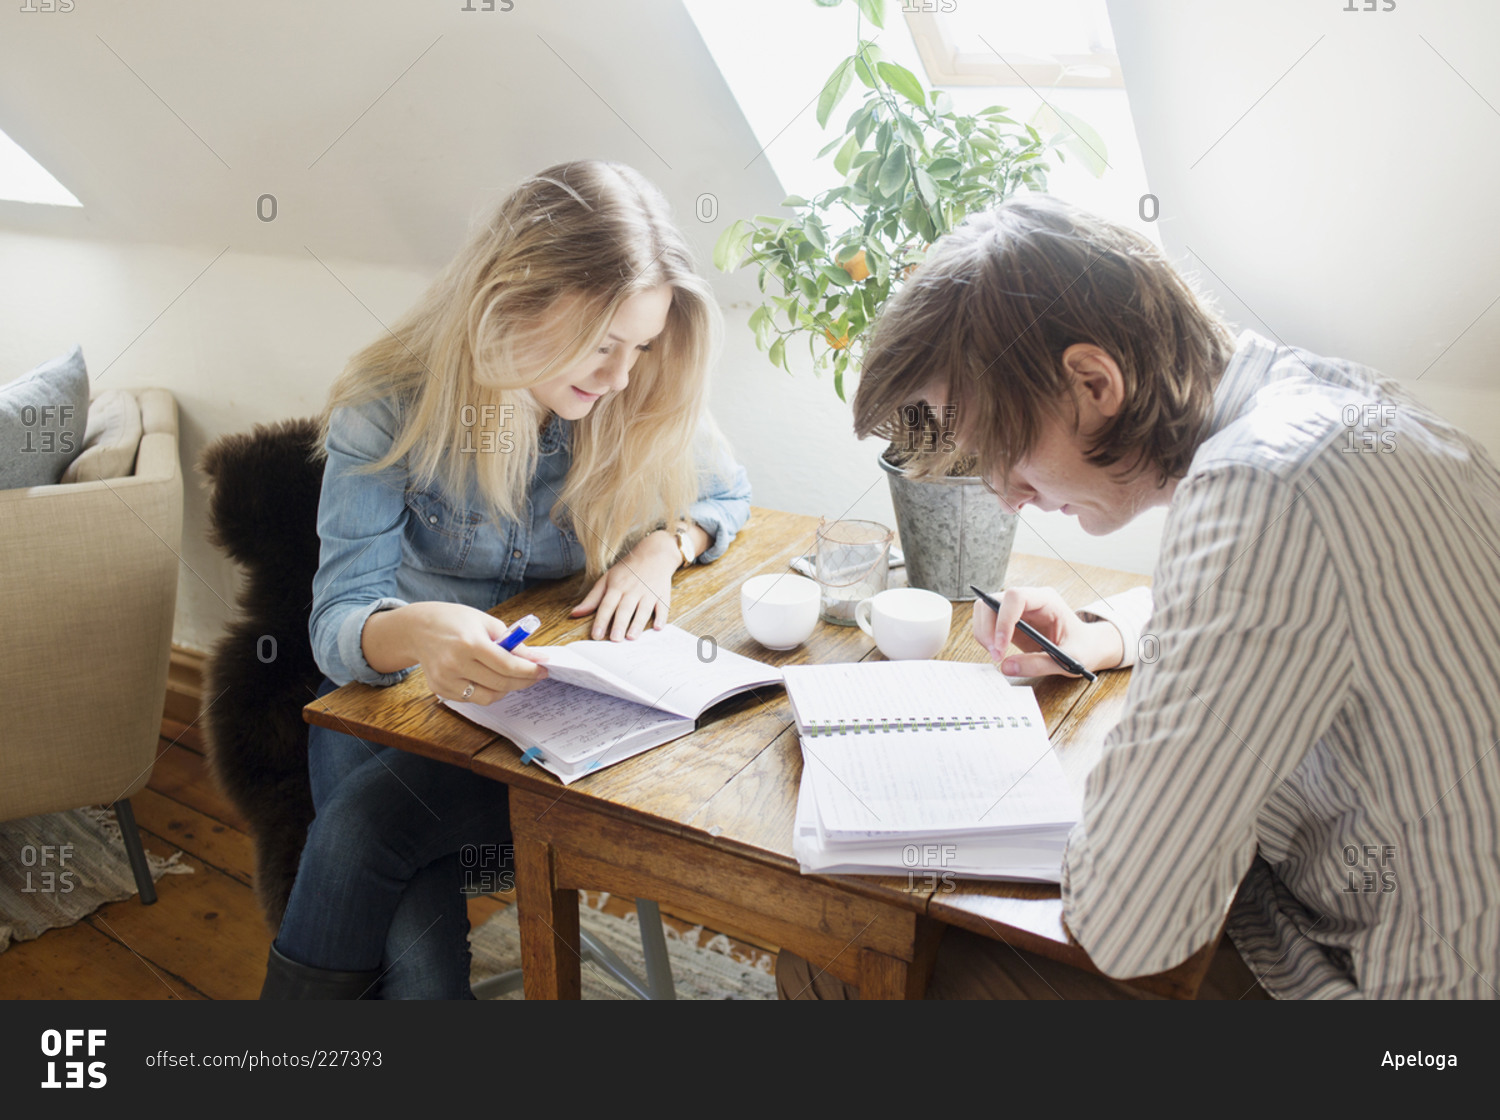 couple studying together